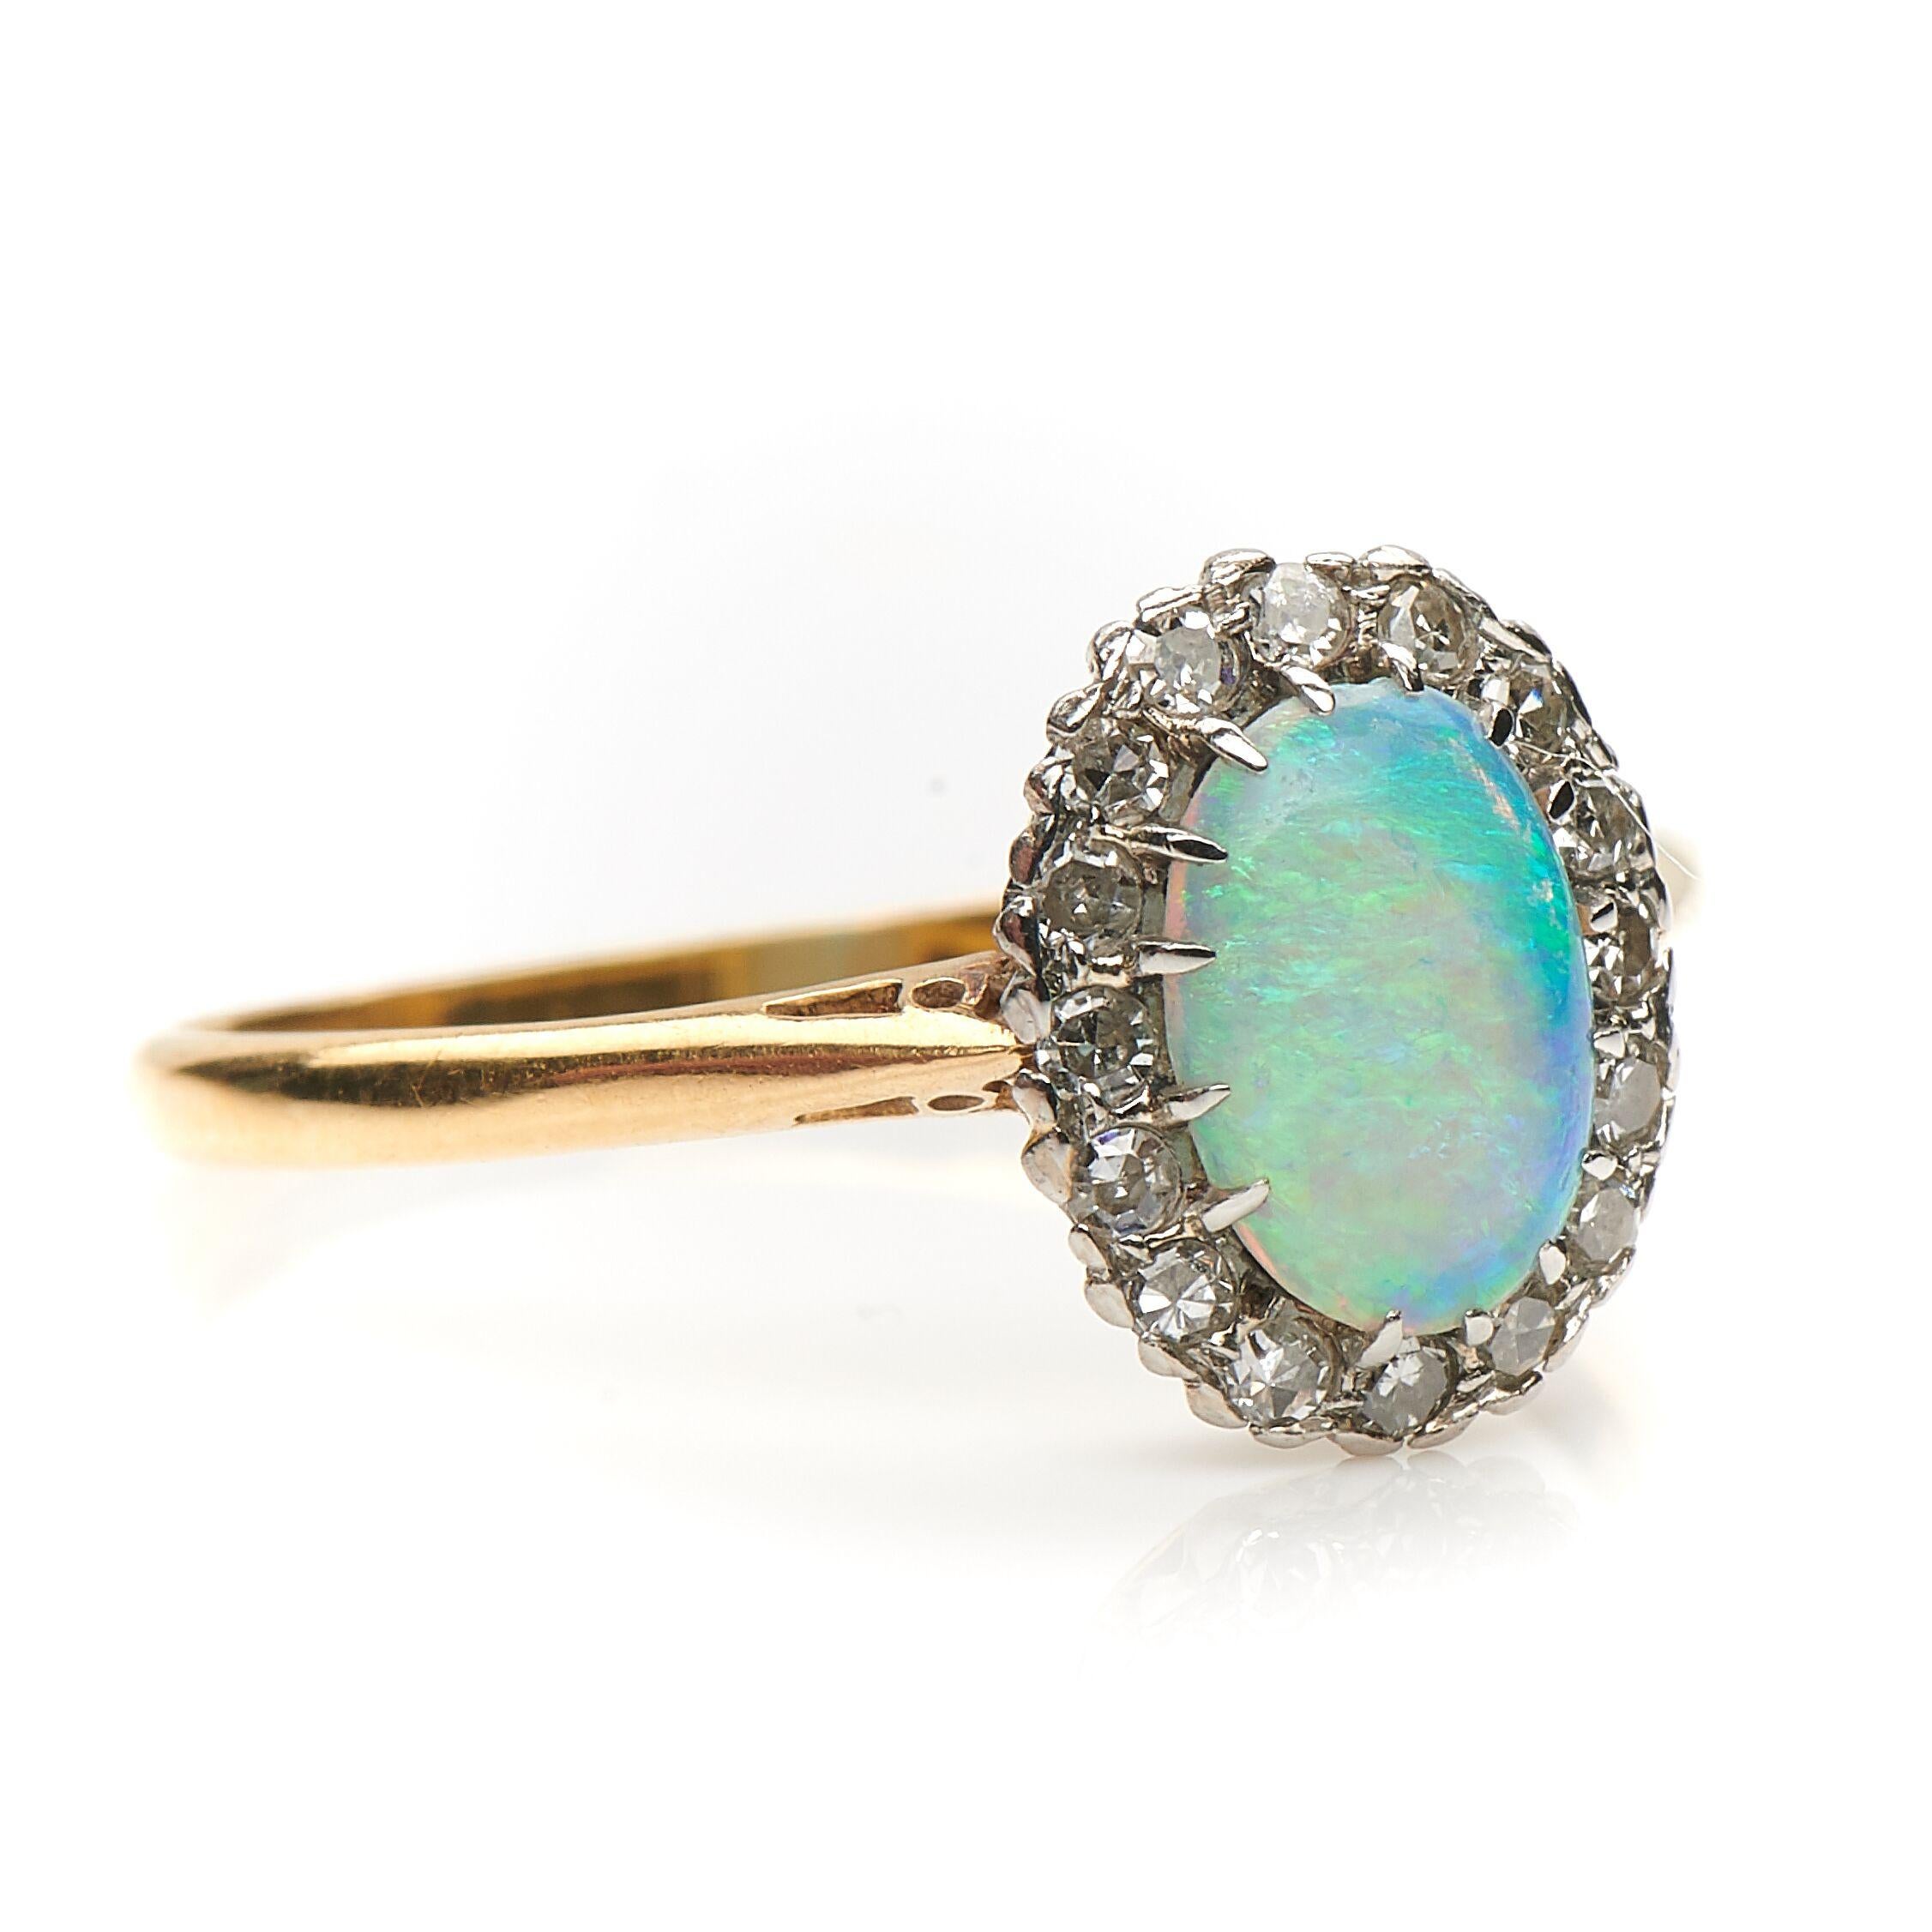 Early Art Deco, opal and diamond cluster ring, circa 1915. Set to centre a wonderful vibrant opal in a mixture of green and blue tones framed by a boarder of delicate single cut diamonds in a platinum and 18ct yellow gold setting. The opal has an